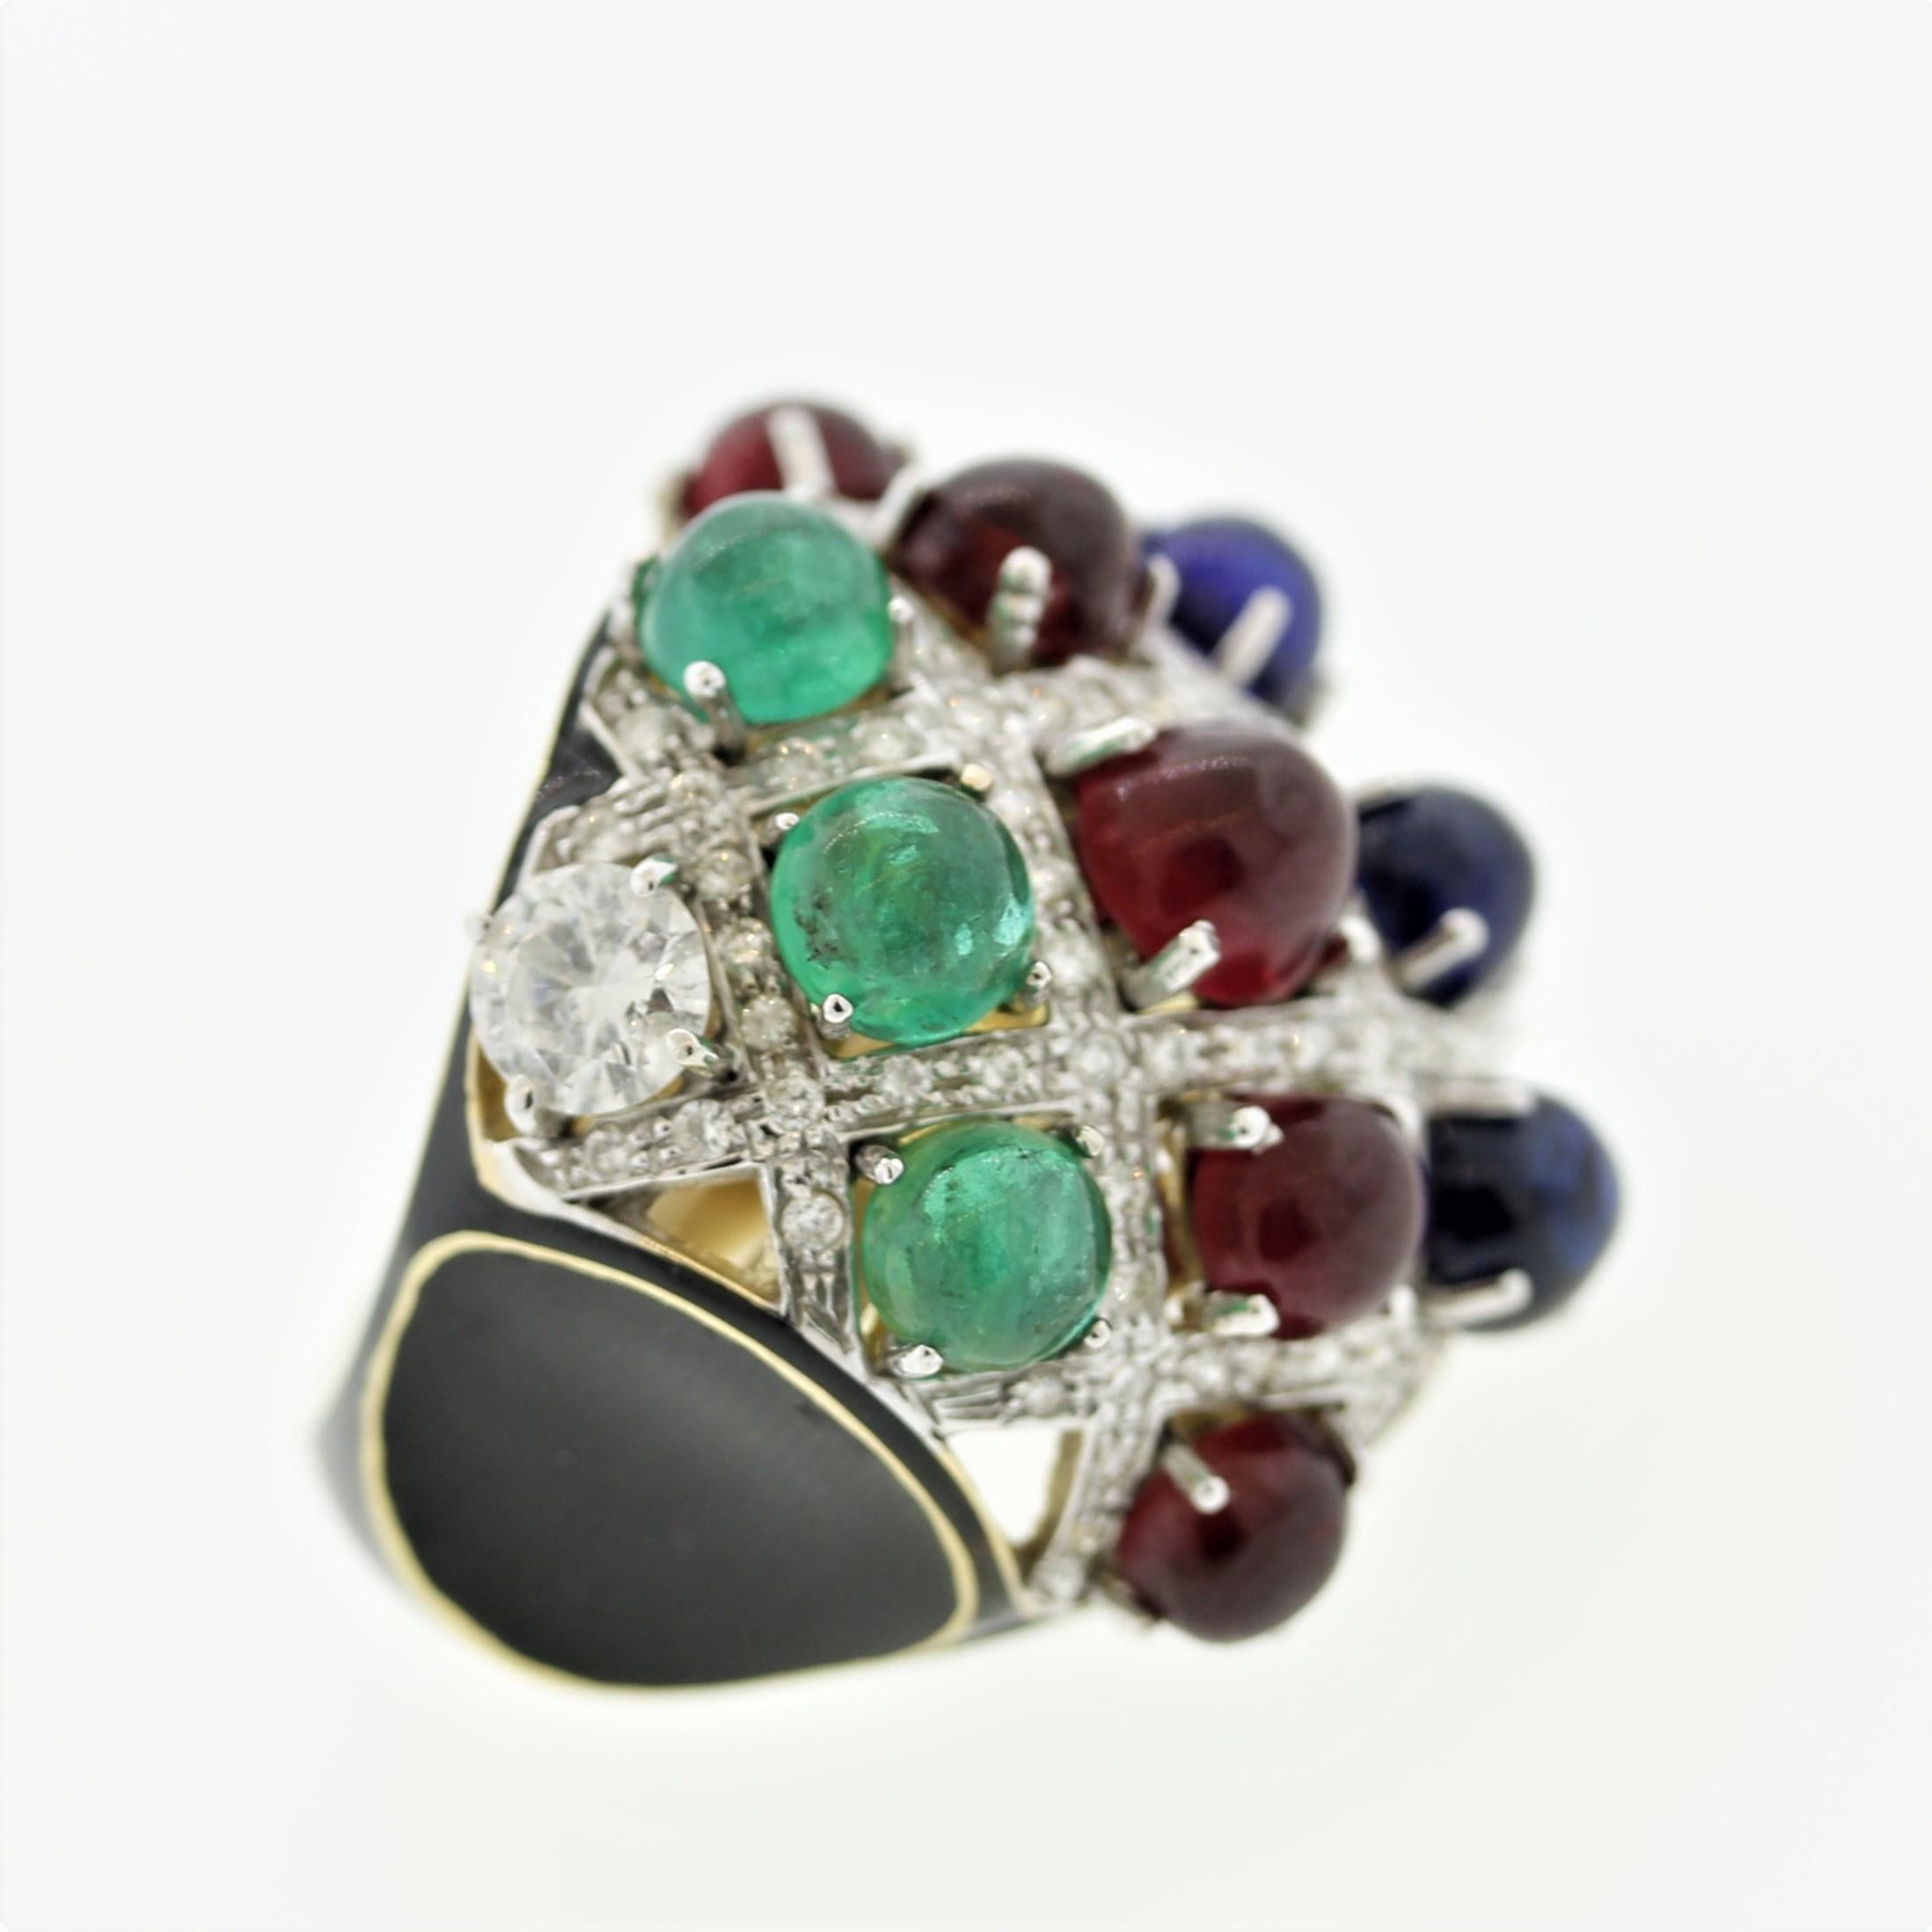 A bright colorful tutti frutti ring featuring 5 bright vivid red rubies, 3 royal blue sapphires, and 3 jelly green emeralds, all of which are fine gem quality. The ring is accented by round brilliant-cut diamonds which add sparkle and brilliance.